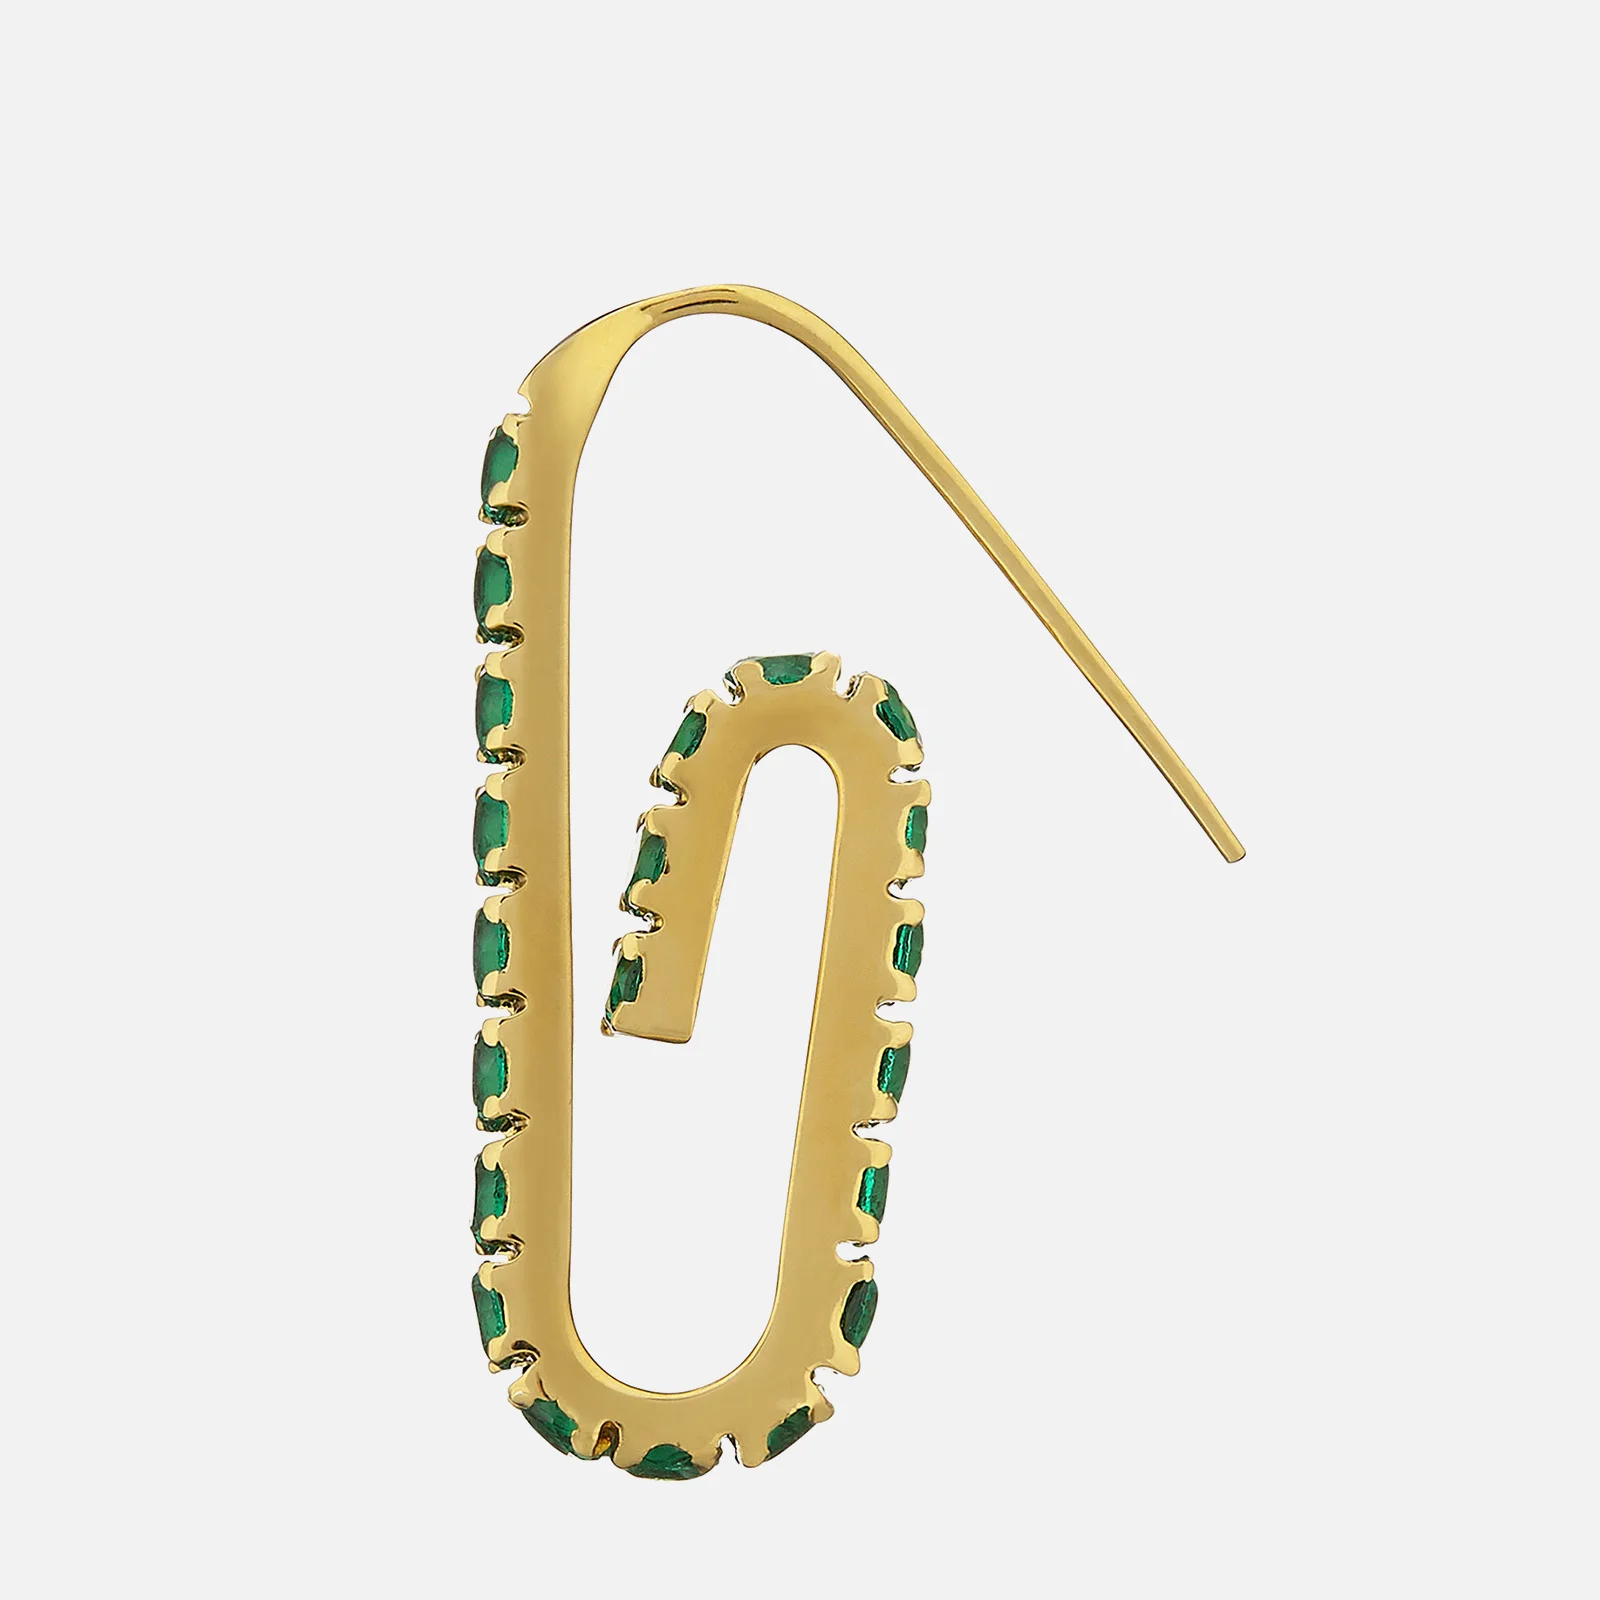 Hillier Bartley Women's Jumbo Pave Paperclip Earring - Gold/Green Image 1